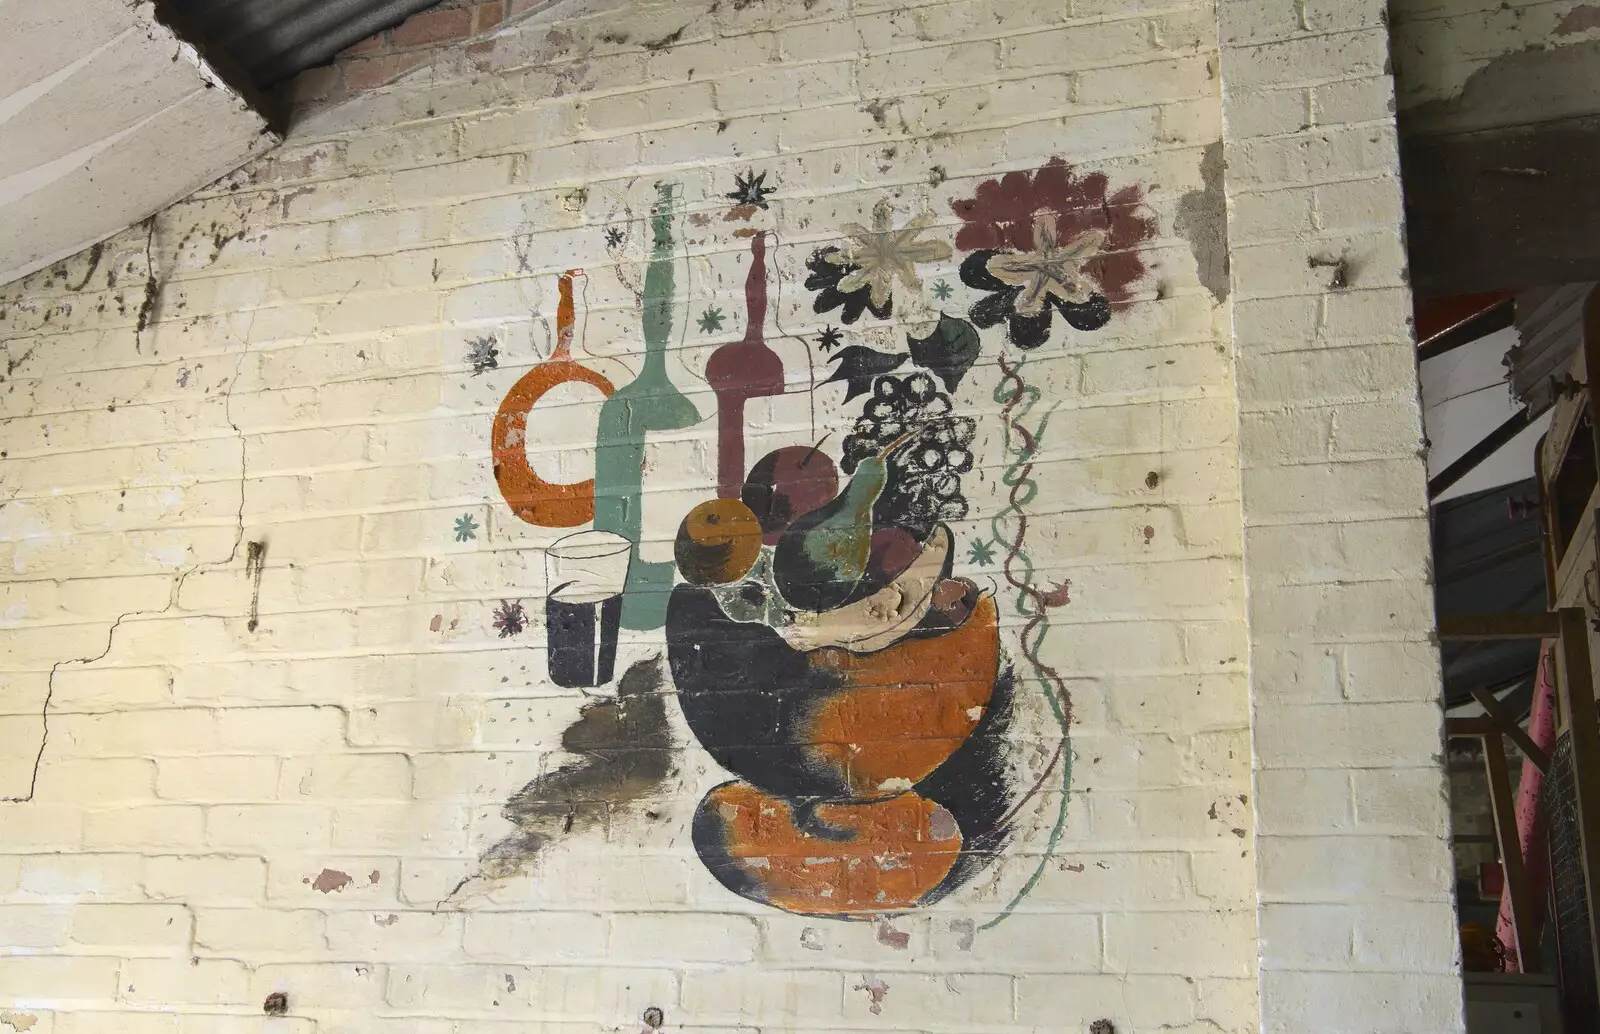 A mural of wine bottles and a fruit bowl, from A 1940s Timewarp, Site 4, Bungay Airfield, Flixton, Suffolk - 9th June 2022